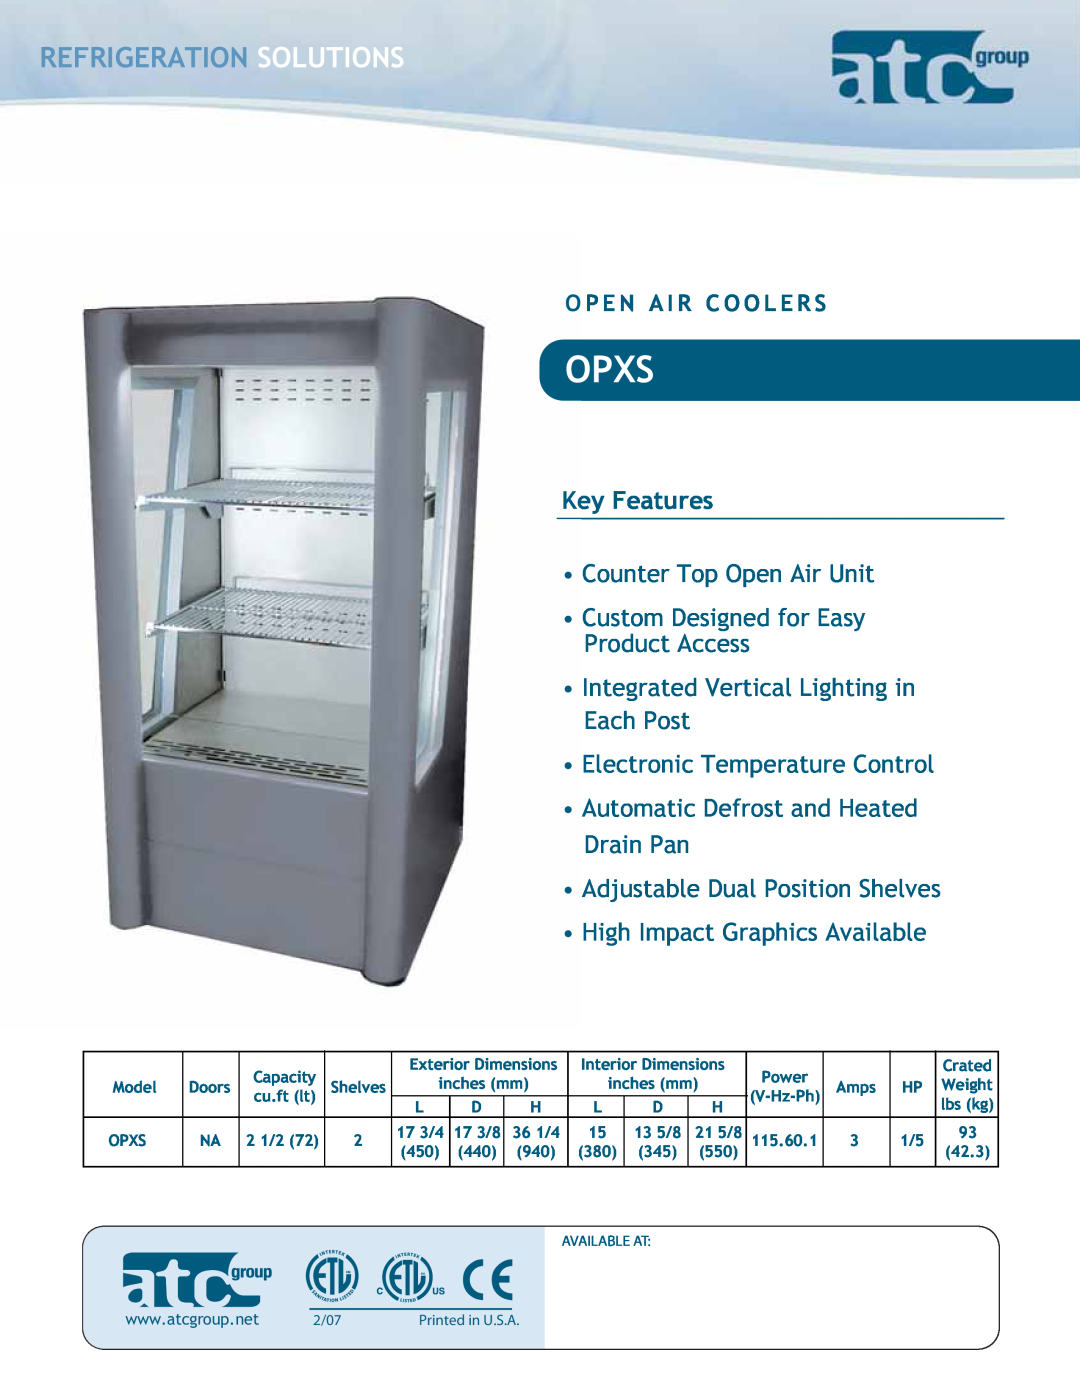 ATC Group OPXS 17 dimensions Opxs, Refrigeration Solutions, Key Features 